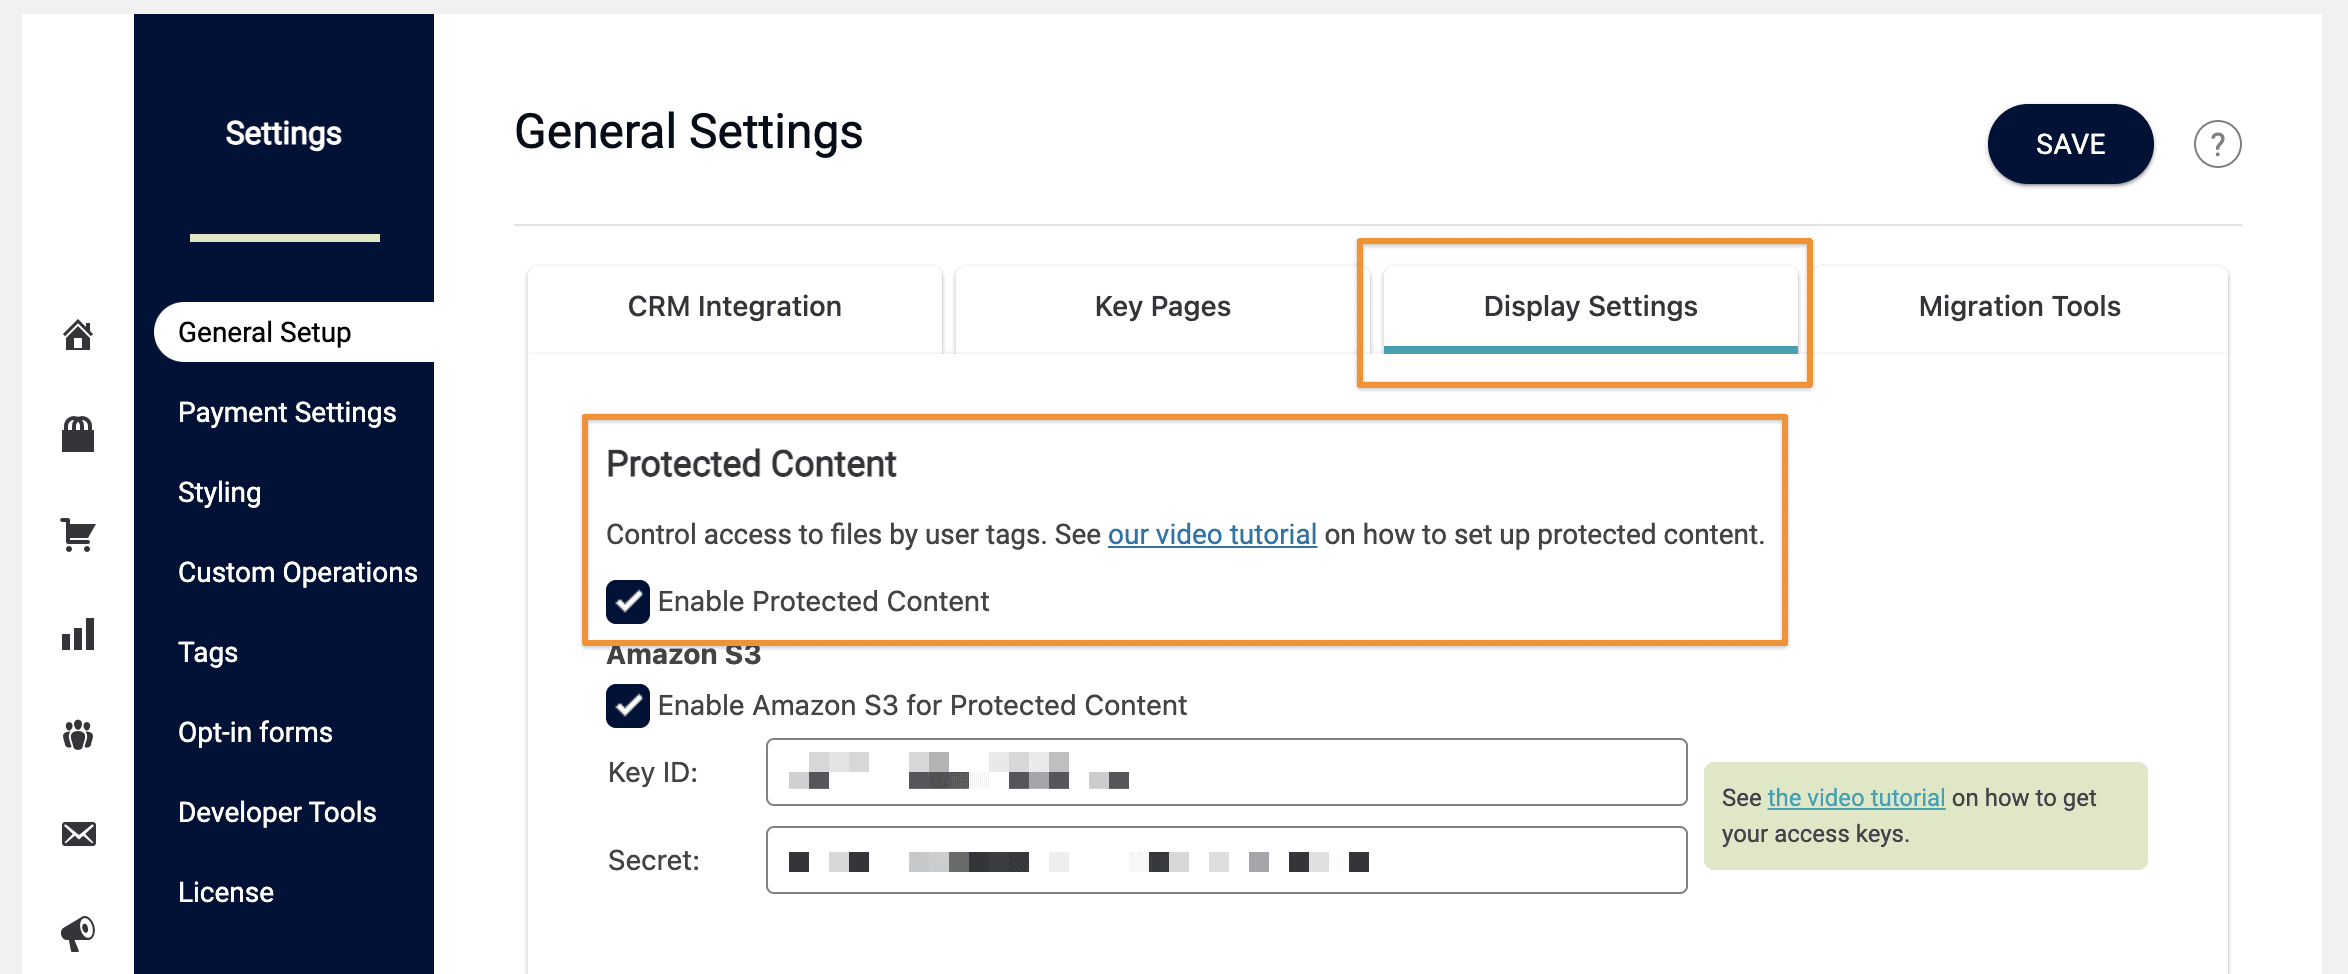 Screenshot showing where to find protected content and enable that setting